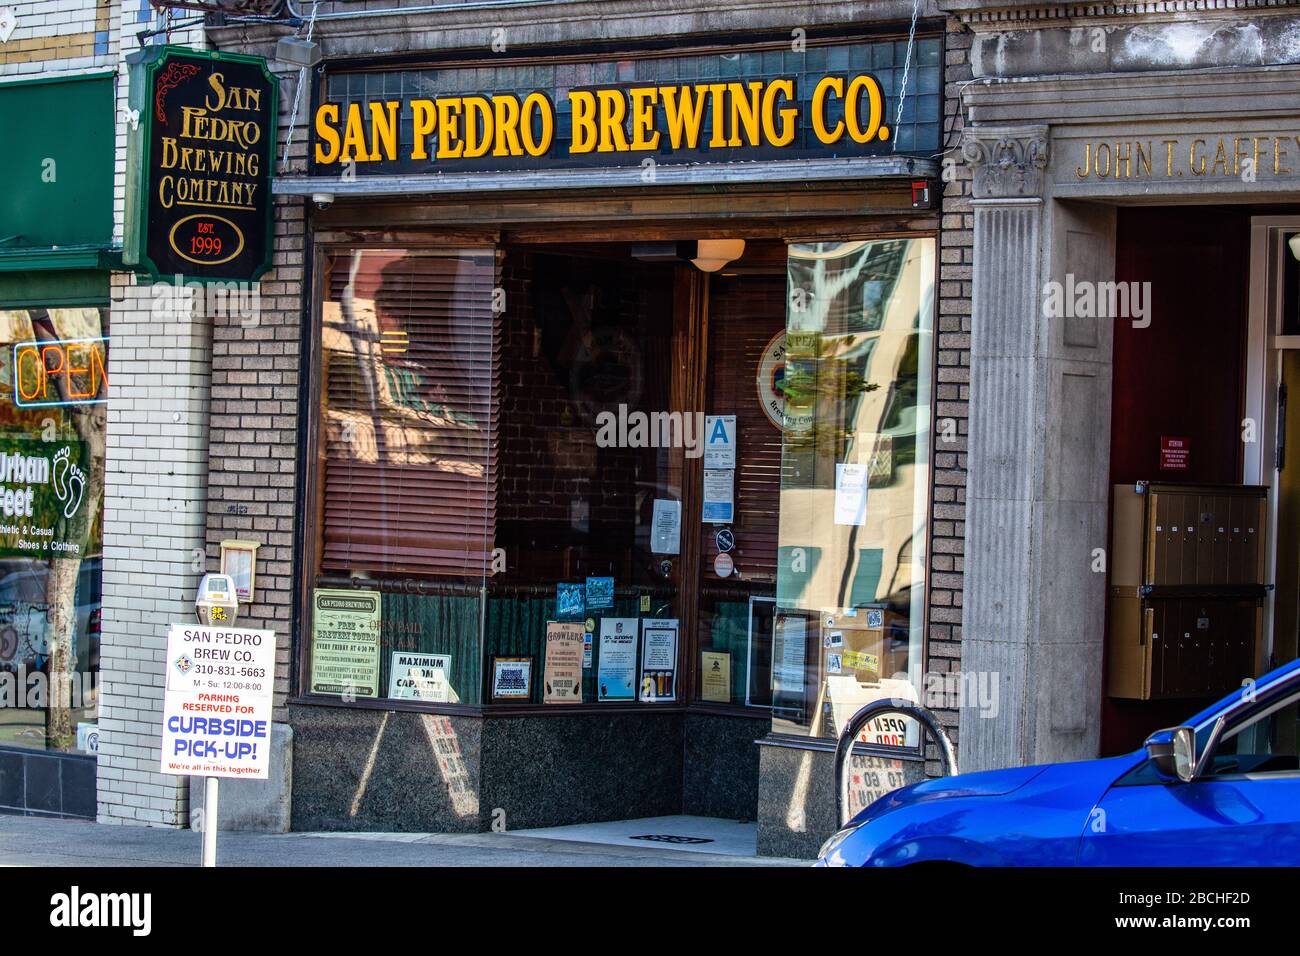 San Pedro Brewing Co offers curbside delivery during stay at home order in San Pedro, CA taken on April 3, 2020 Stock Photo